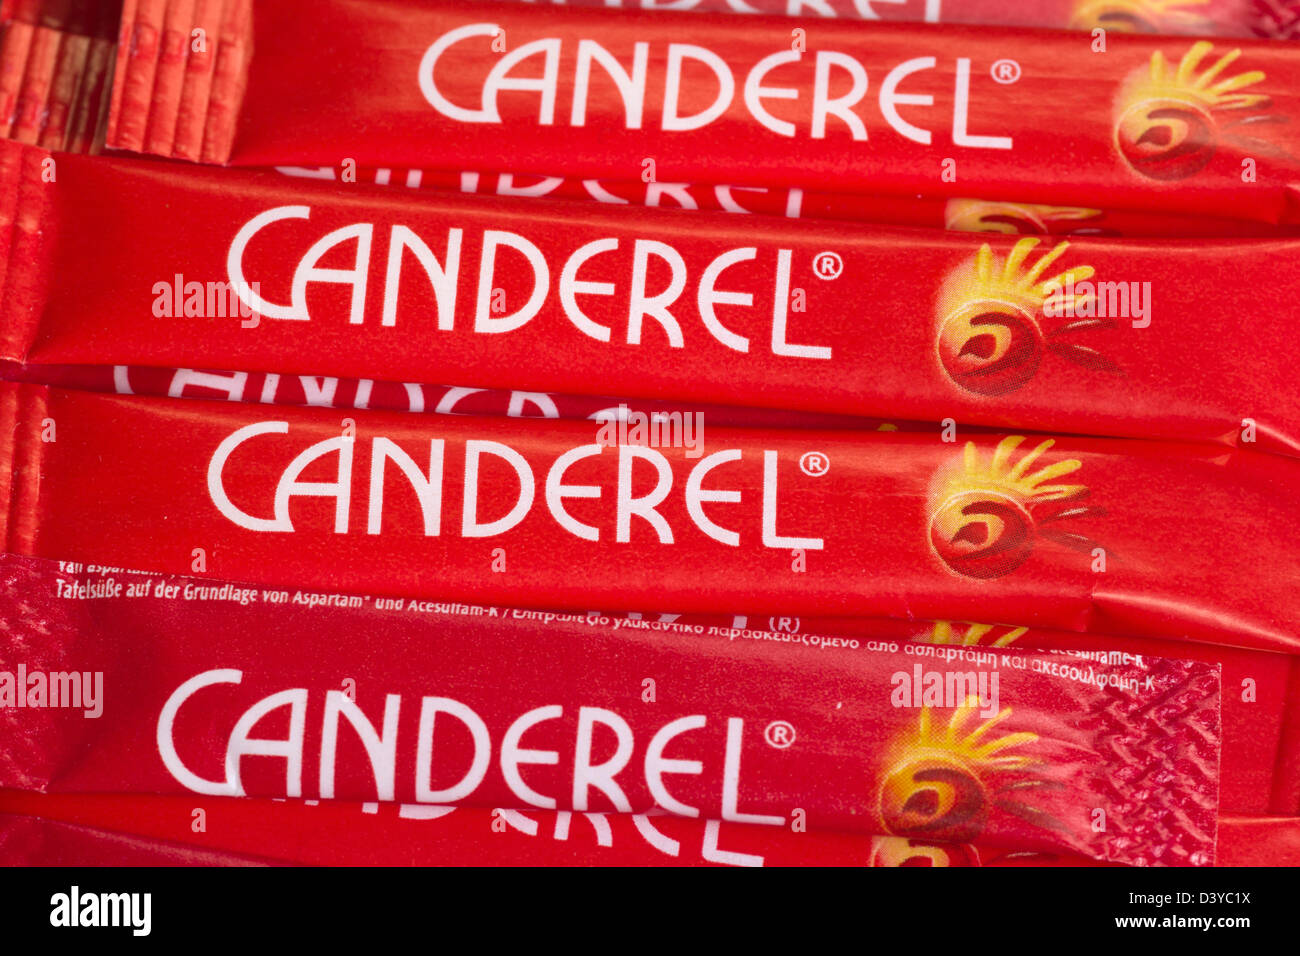 Sachets of Canderel artificial sweetener Stock Photo